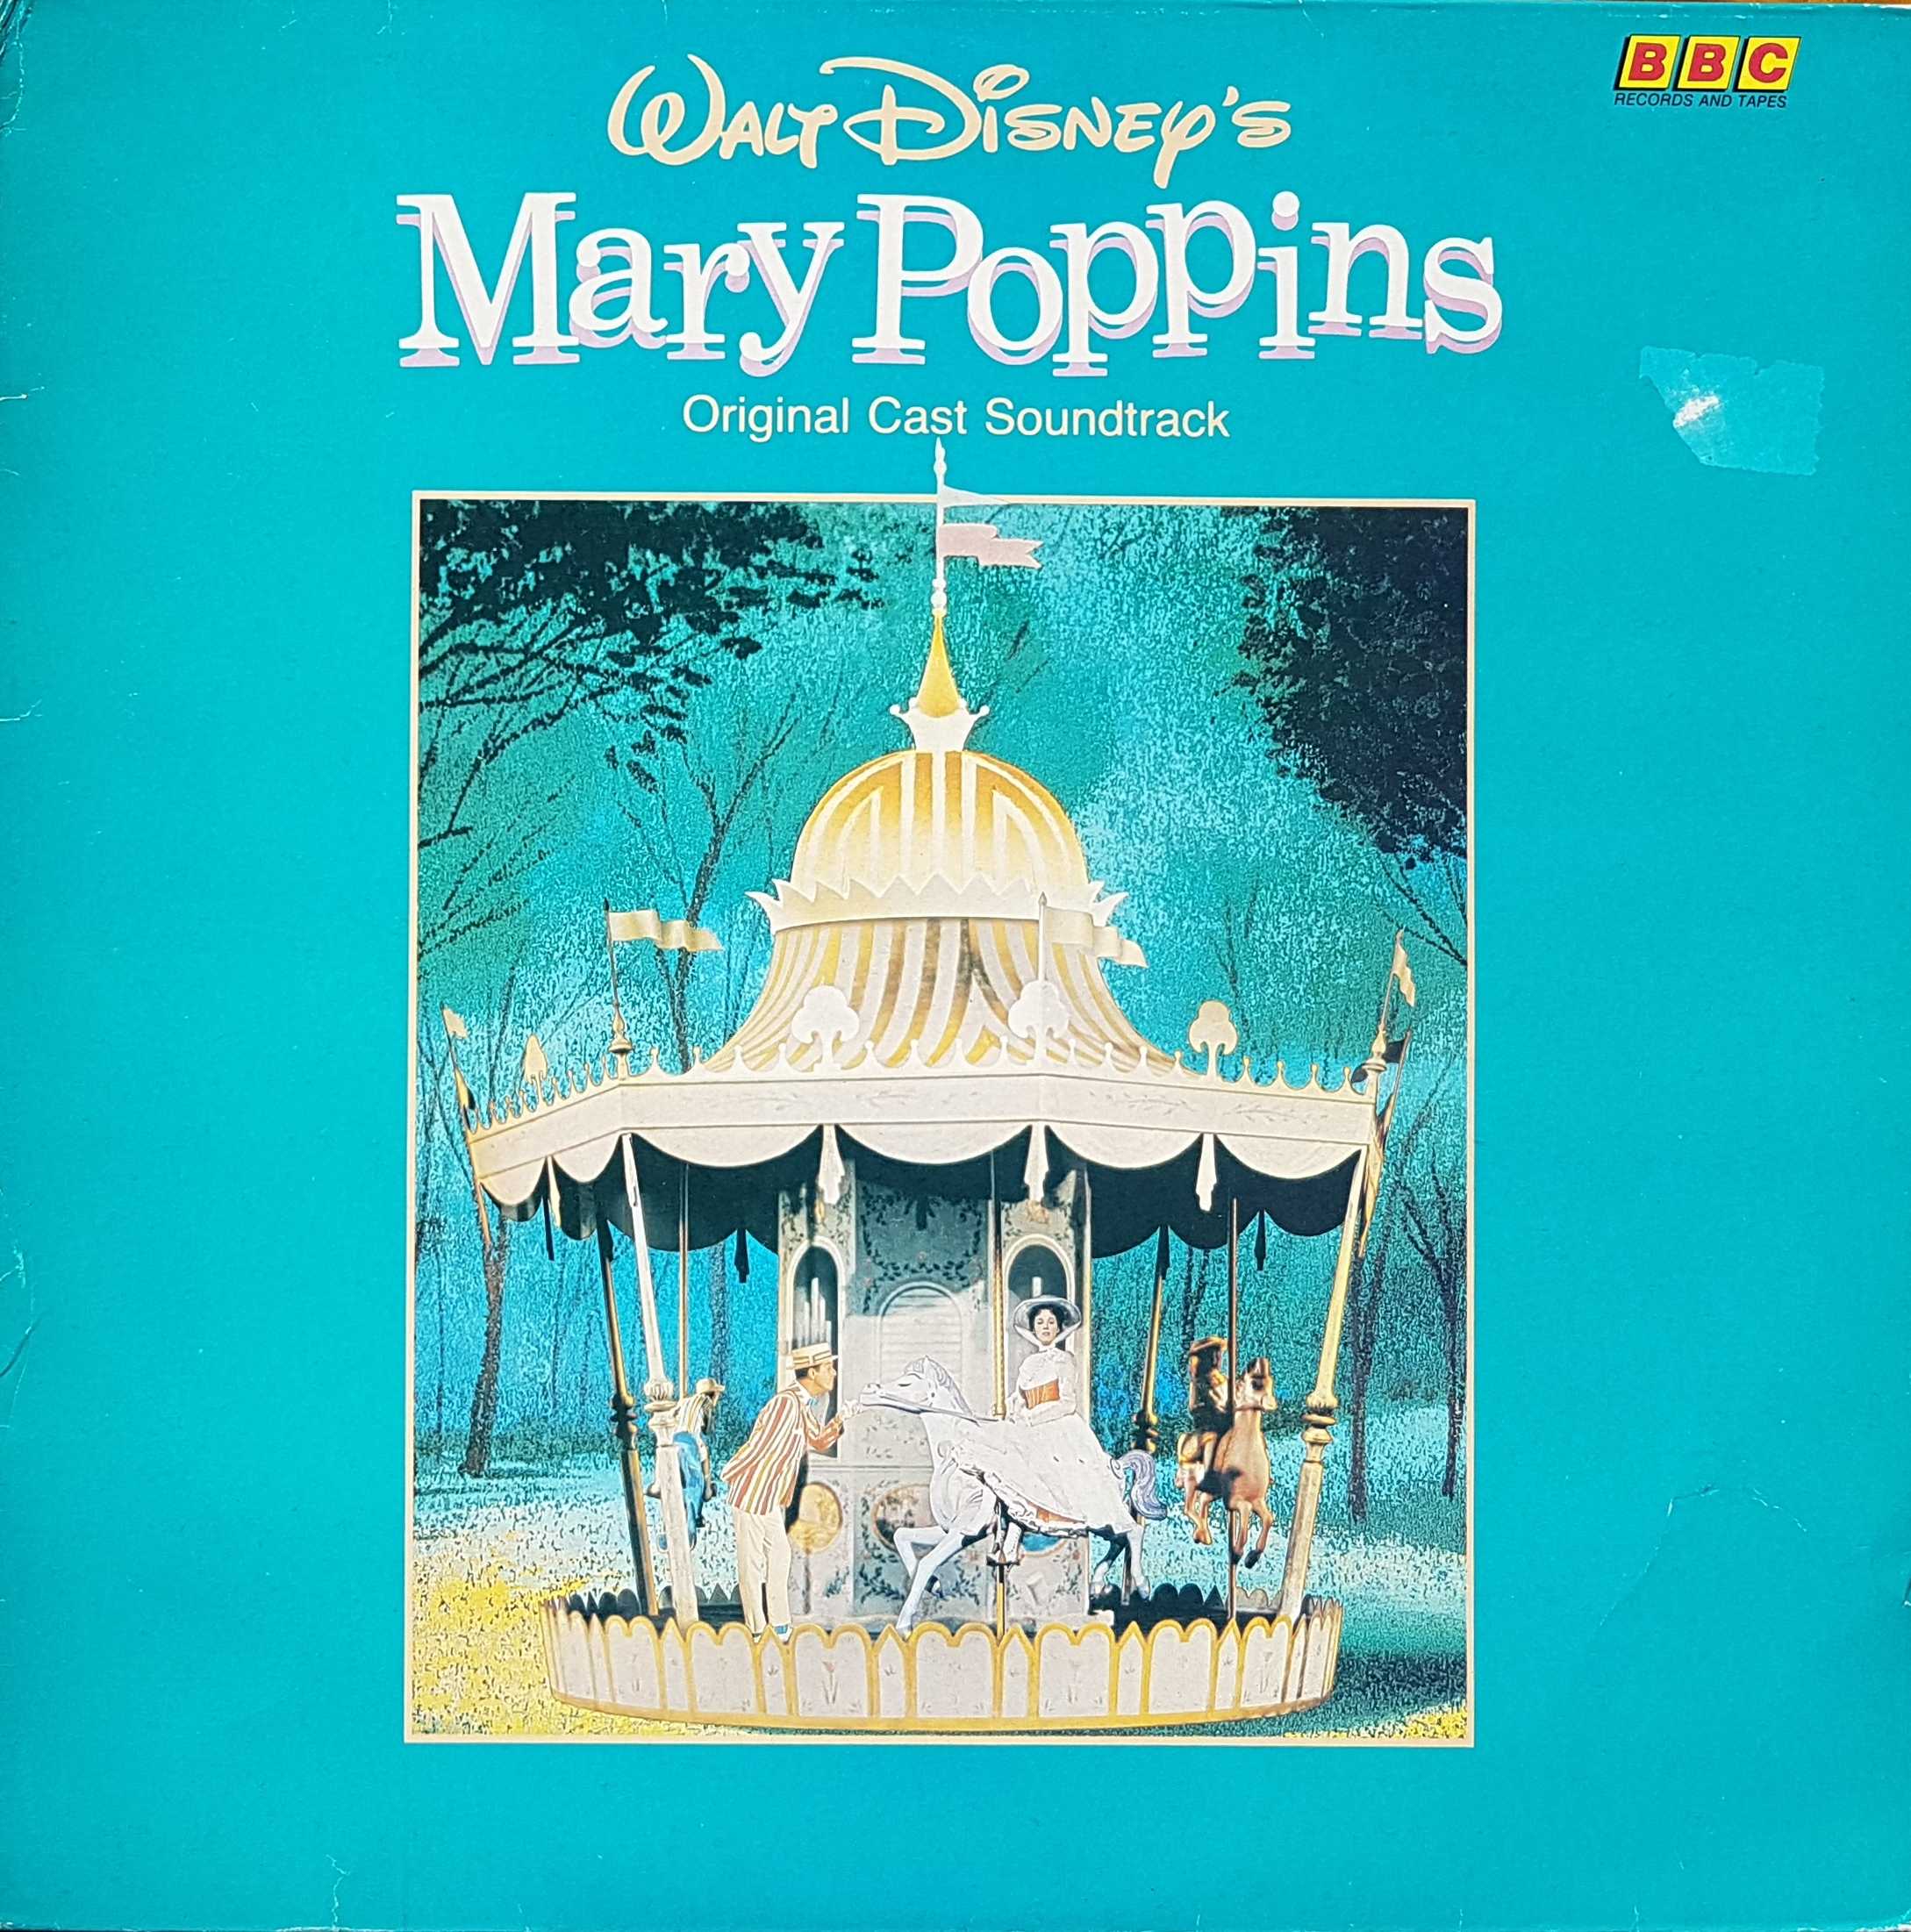 Picture of REH 535 Mary Poppins by artist P. L. Travers / Richard M. Sherman / Robert B. Sherman / Arr. Irwin Kostal from the BBC albums - Records and Tapes library